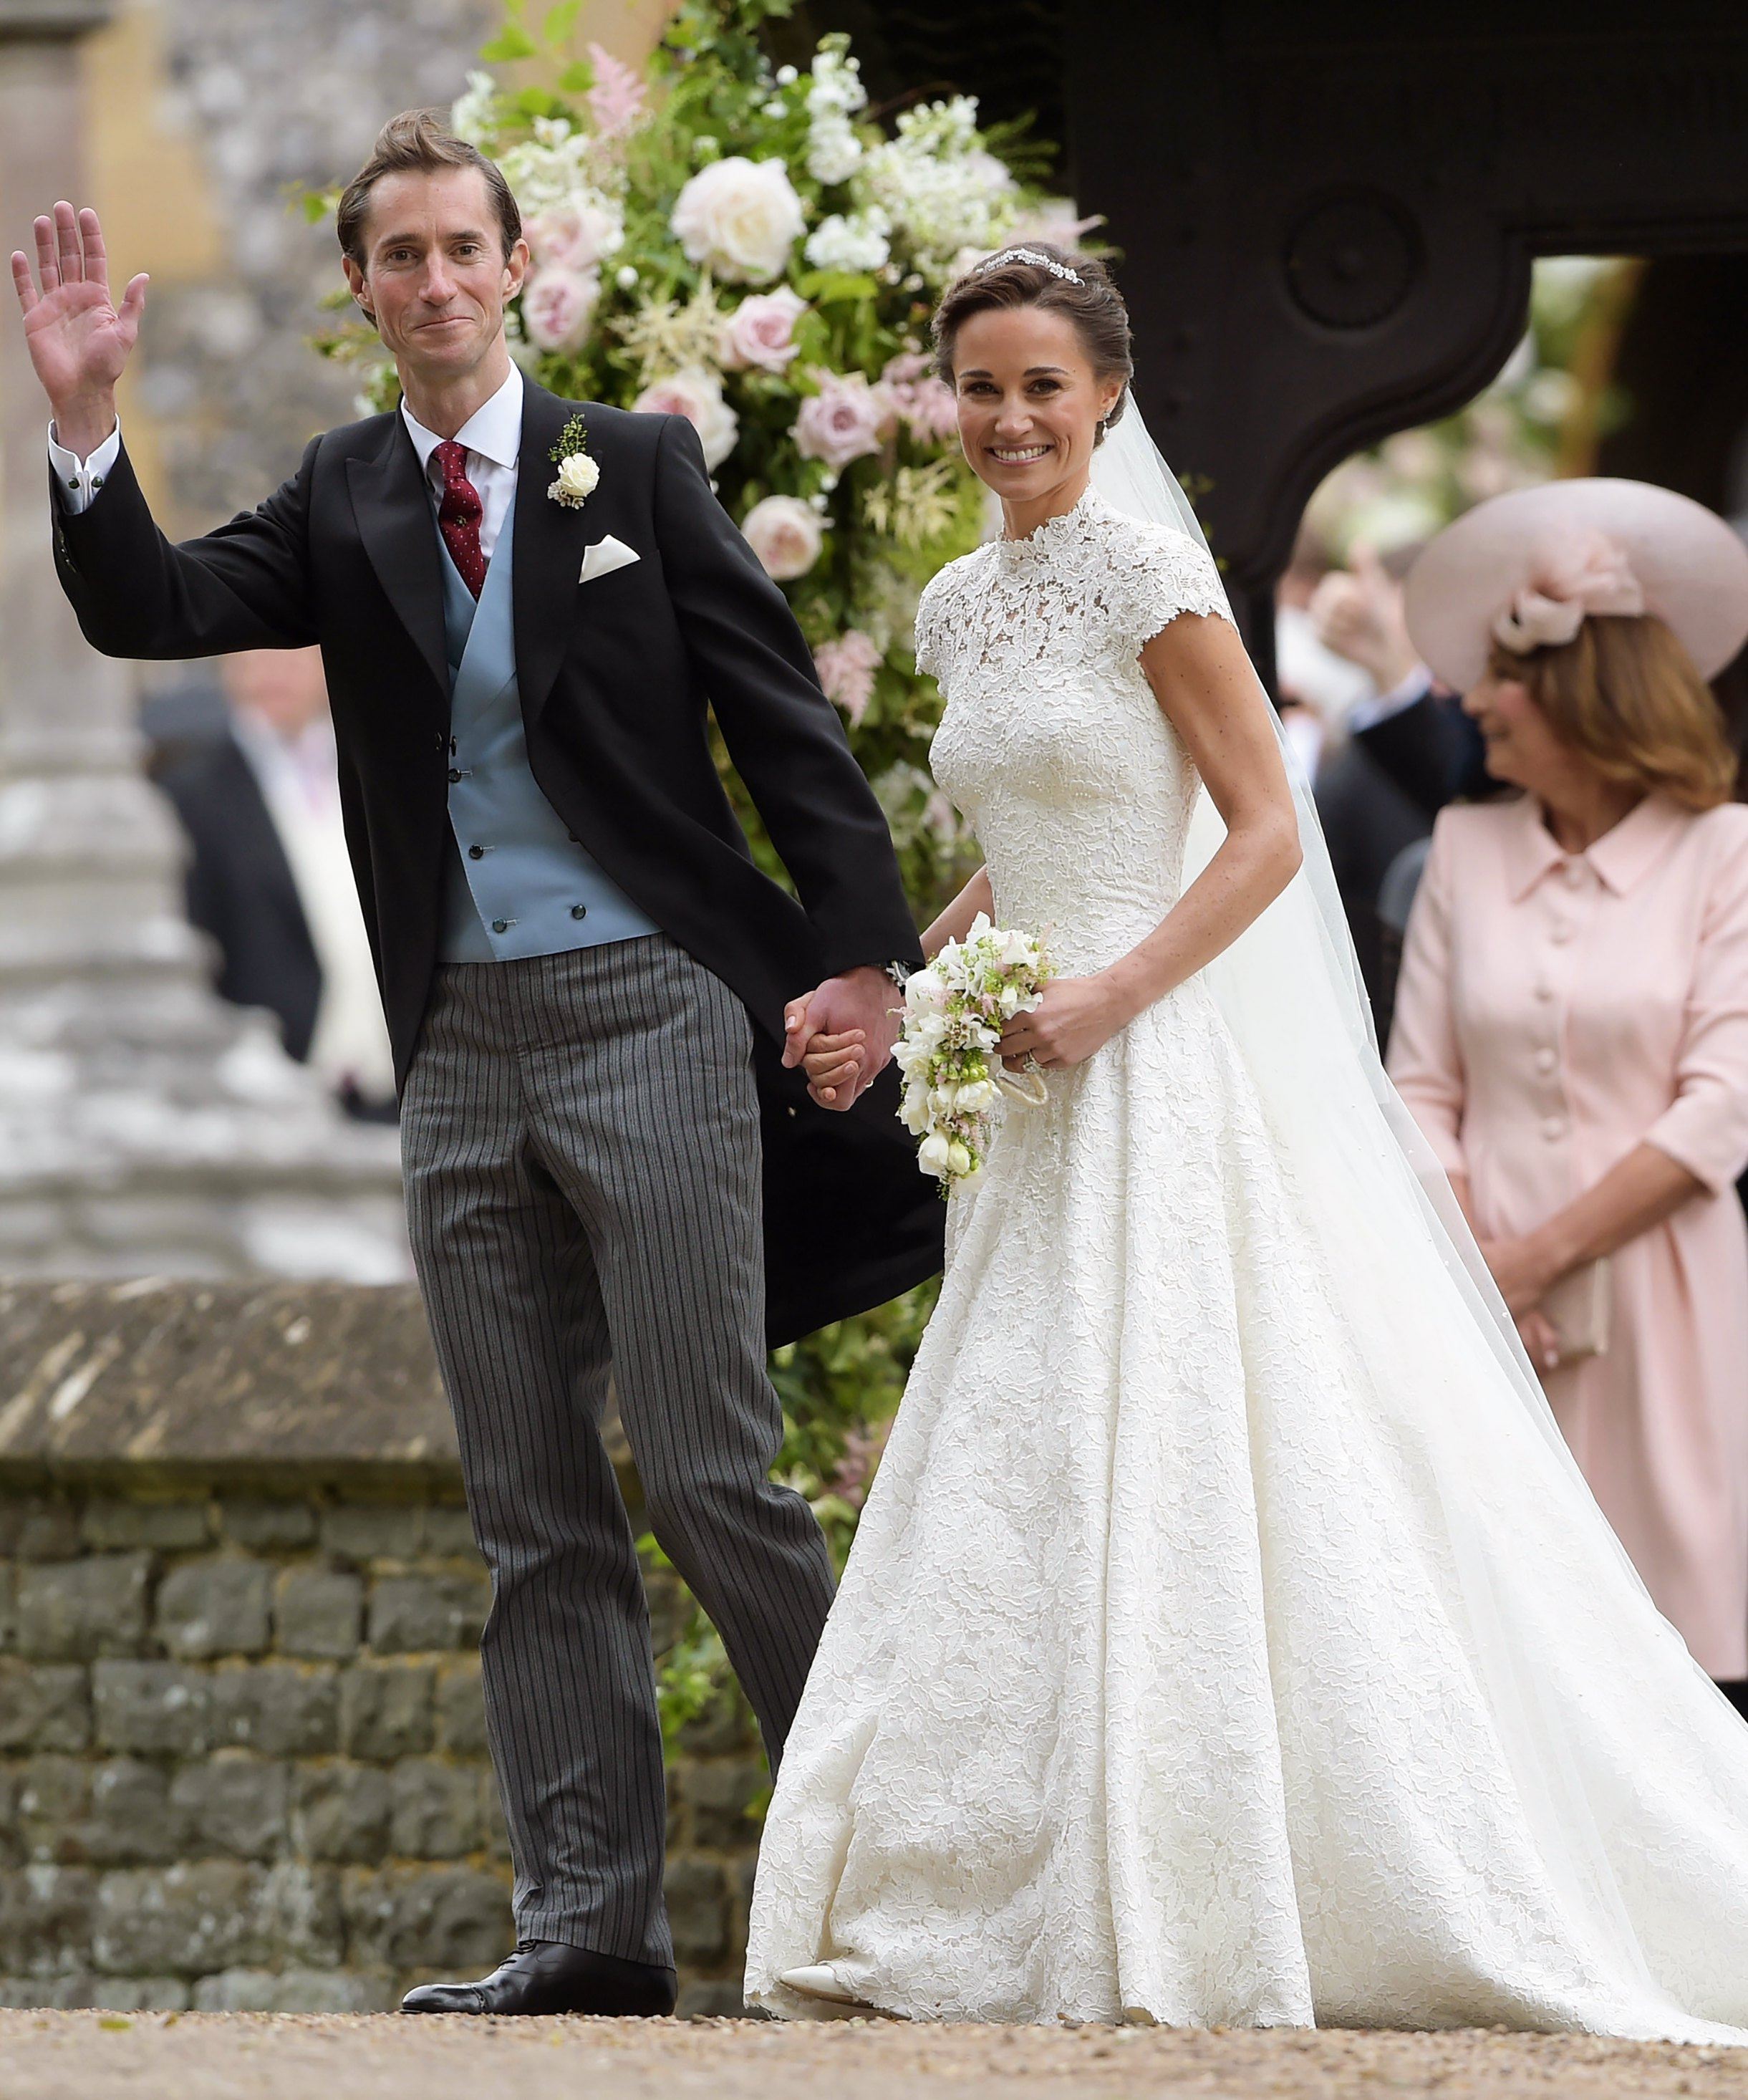 Pippa Middleton, younger sister of Kate Middleton, and James Matthews made headlines with their wedding in 2017 – and the couple just welcomed their third child. Photo: EPA